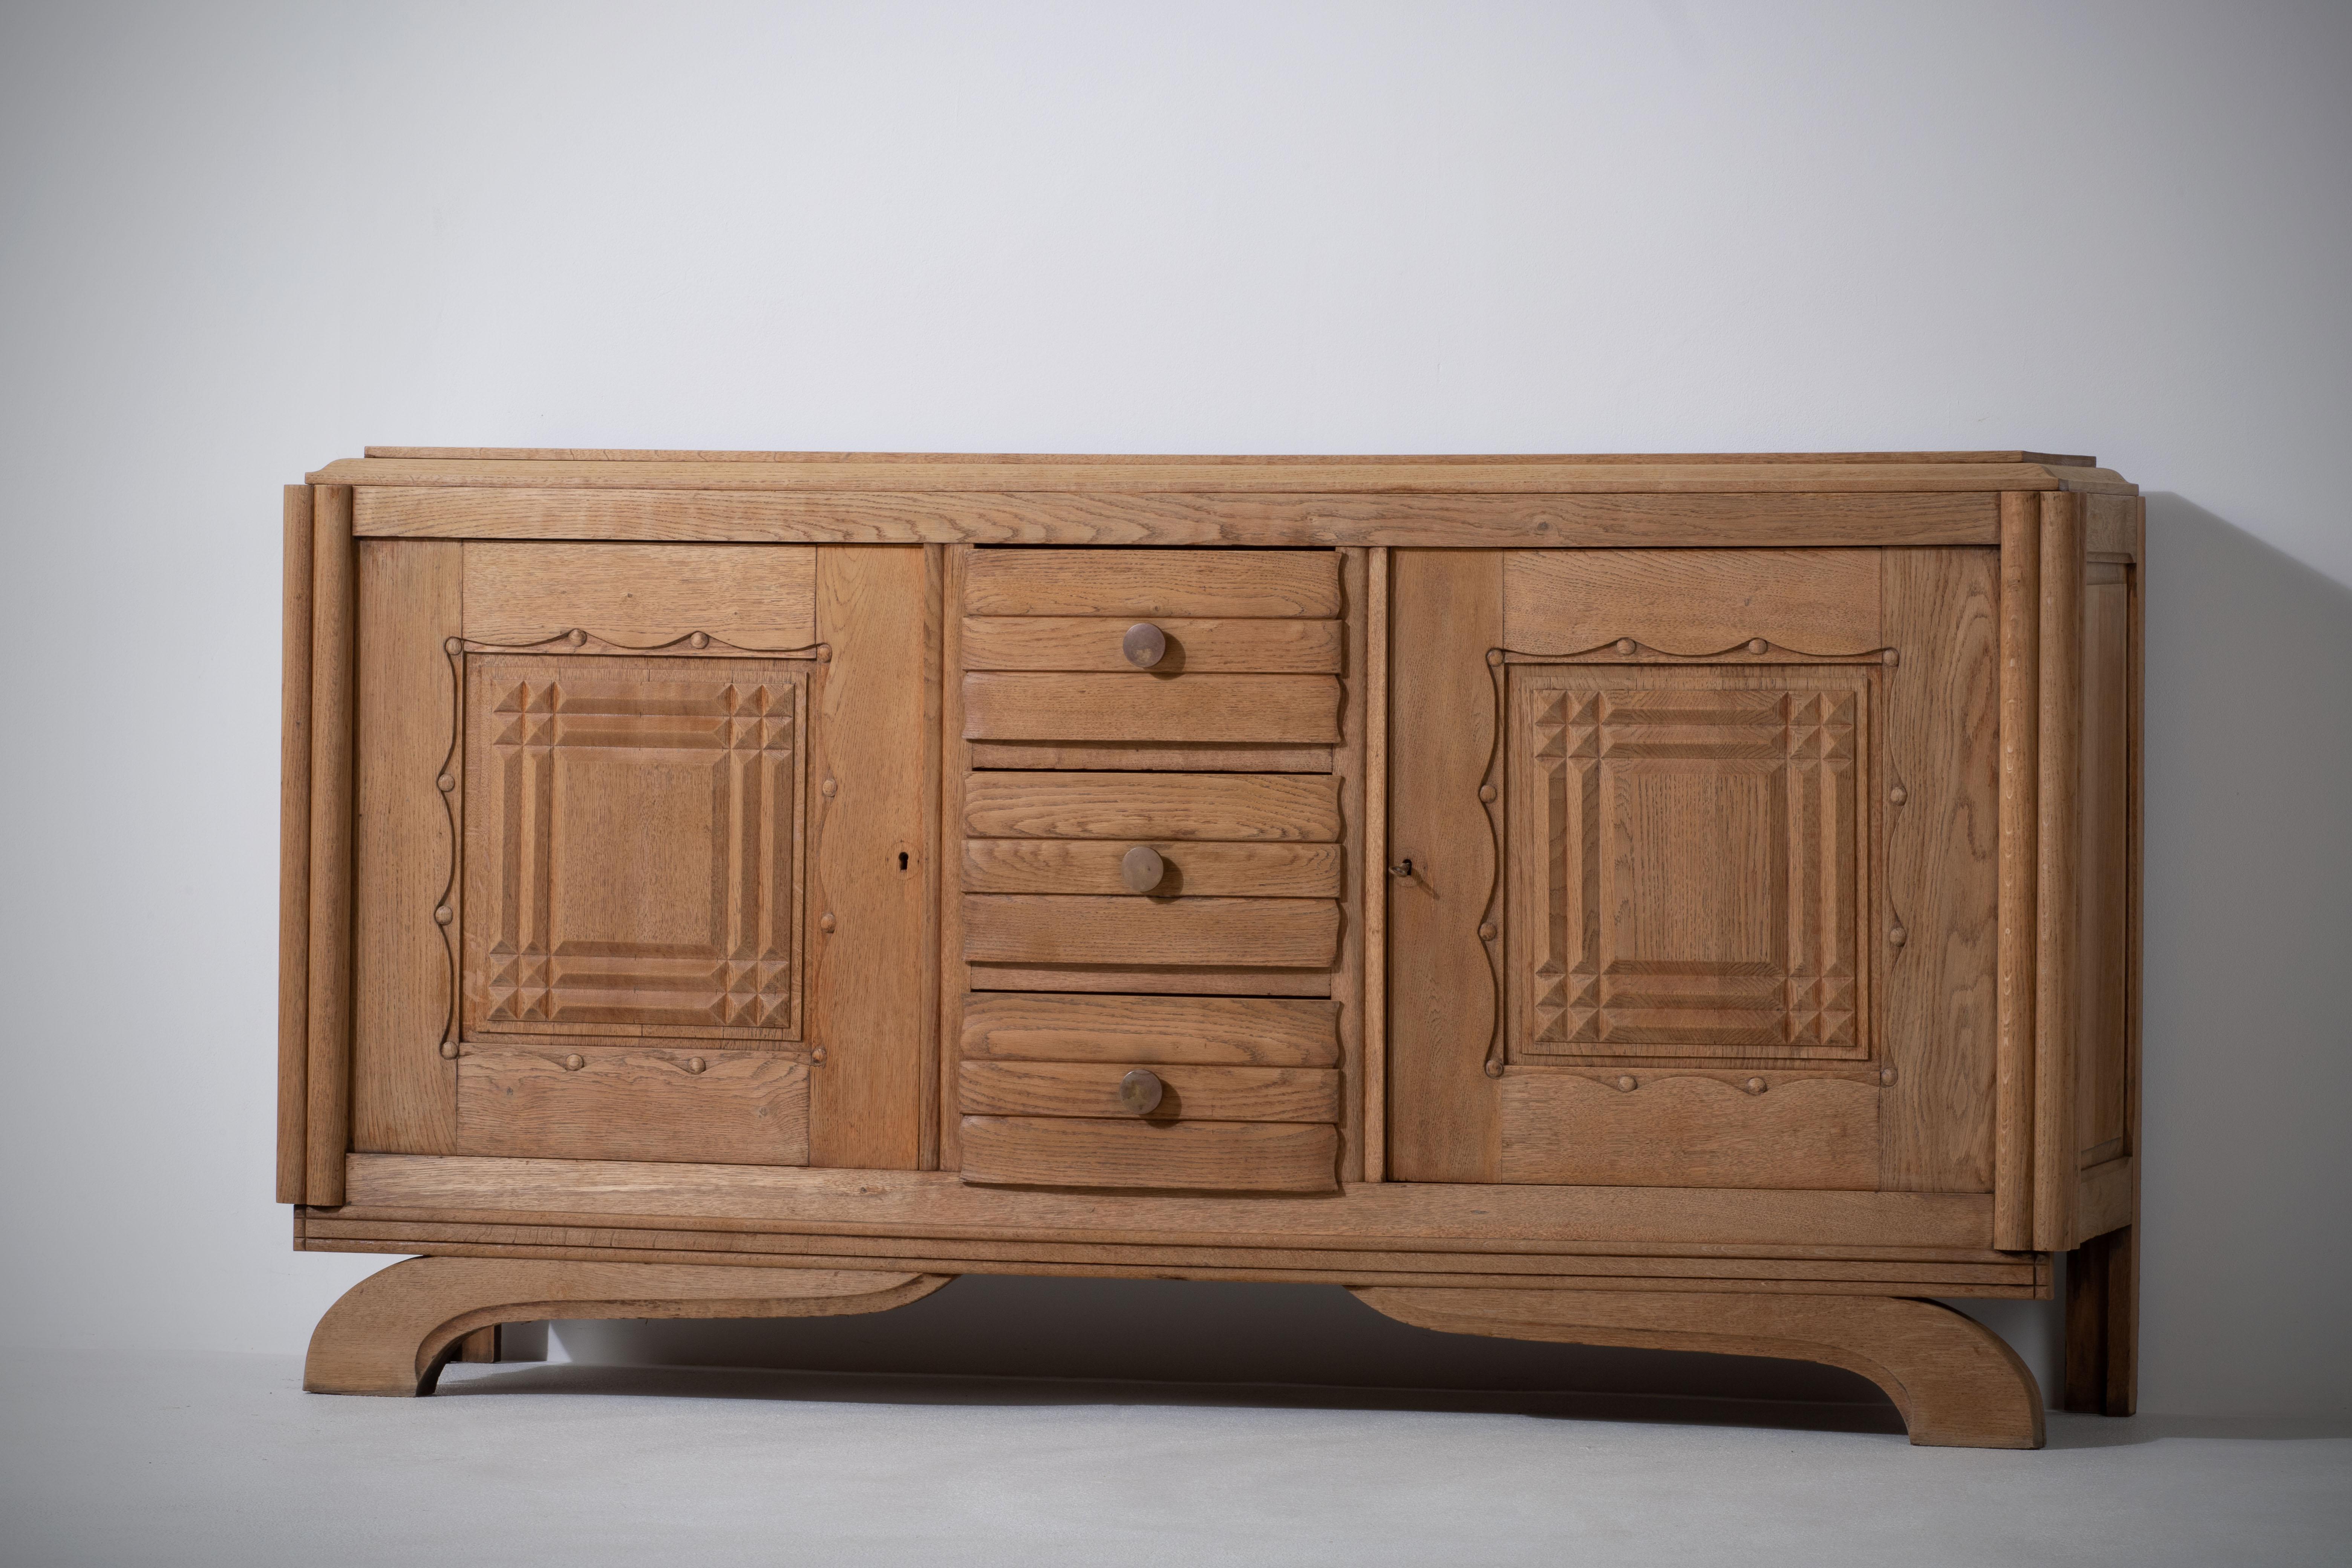 Art Deco Raw Solid Oak Cabinet with Graphic Details, France, 1940s For Sale